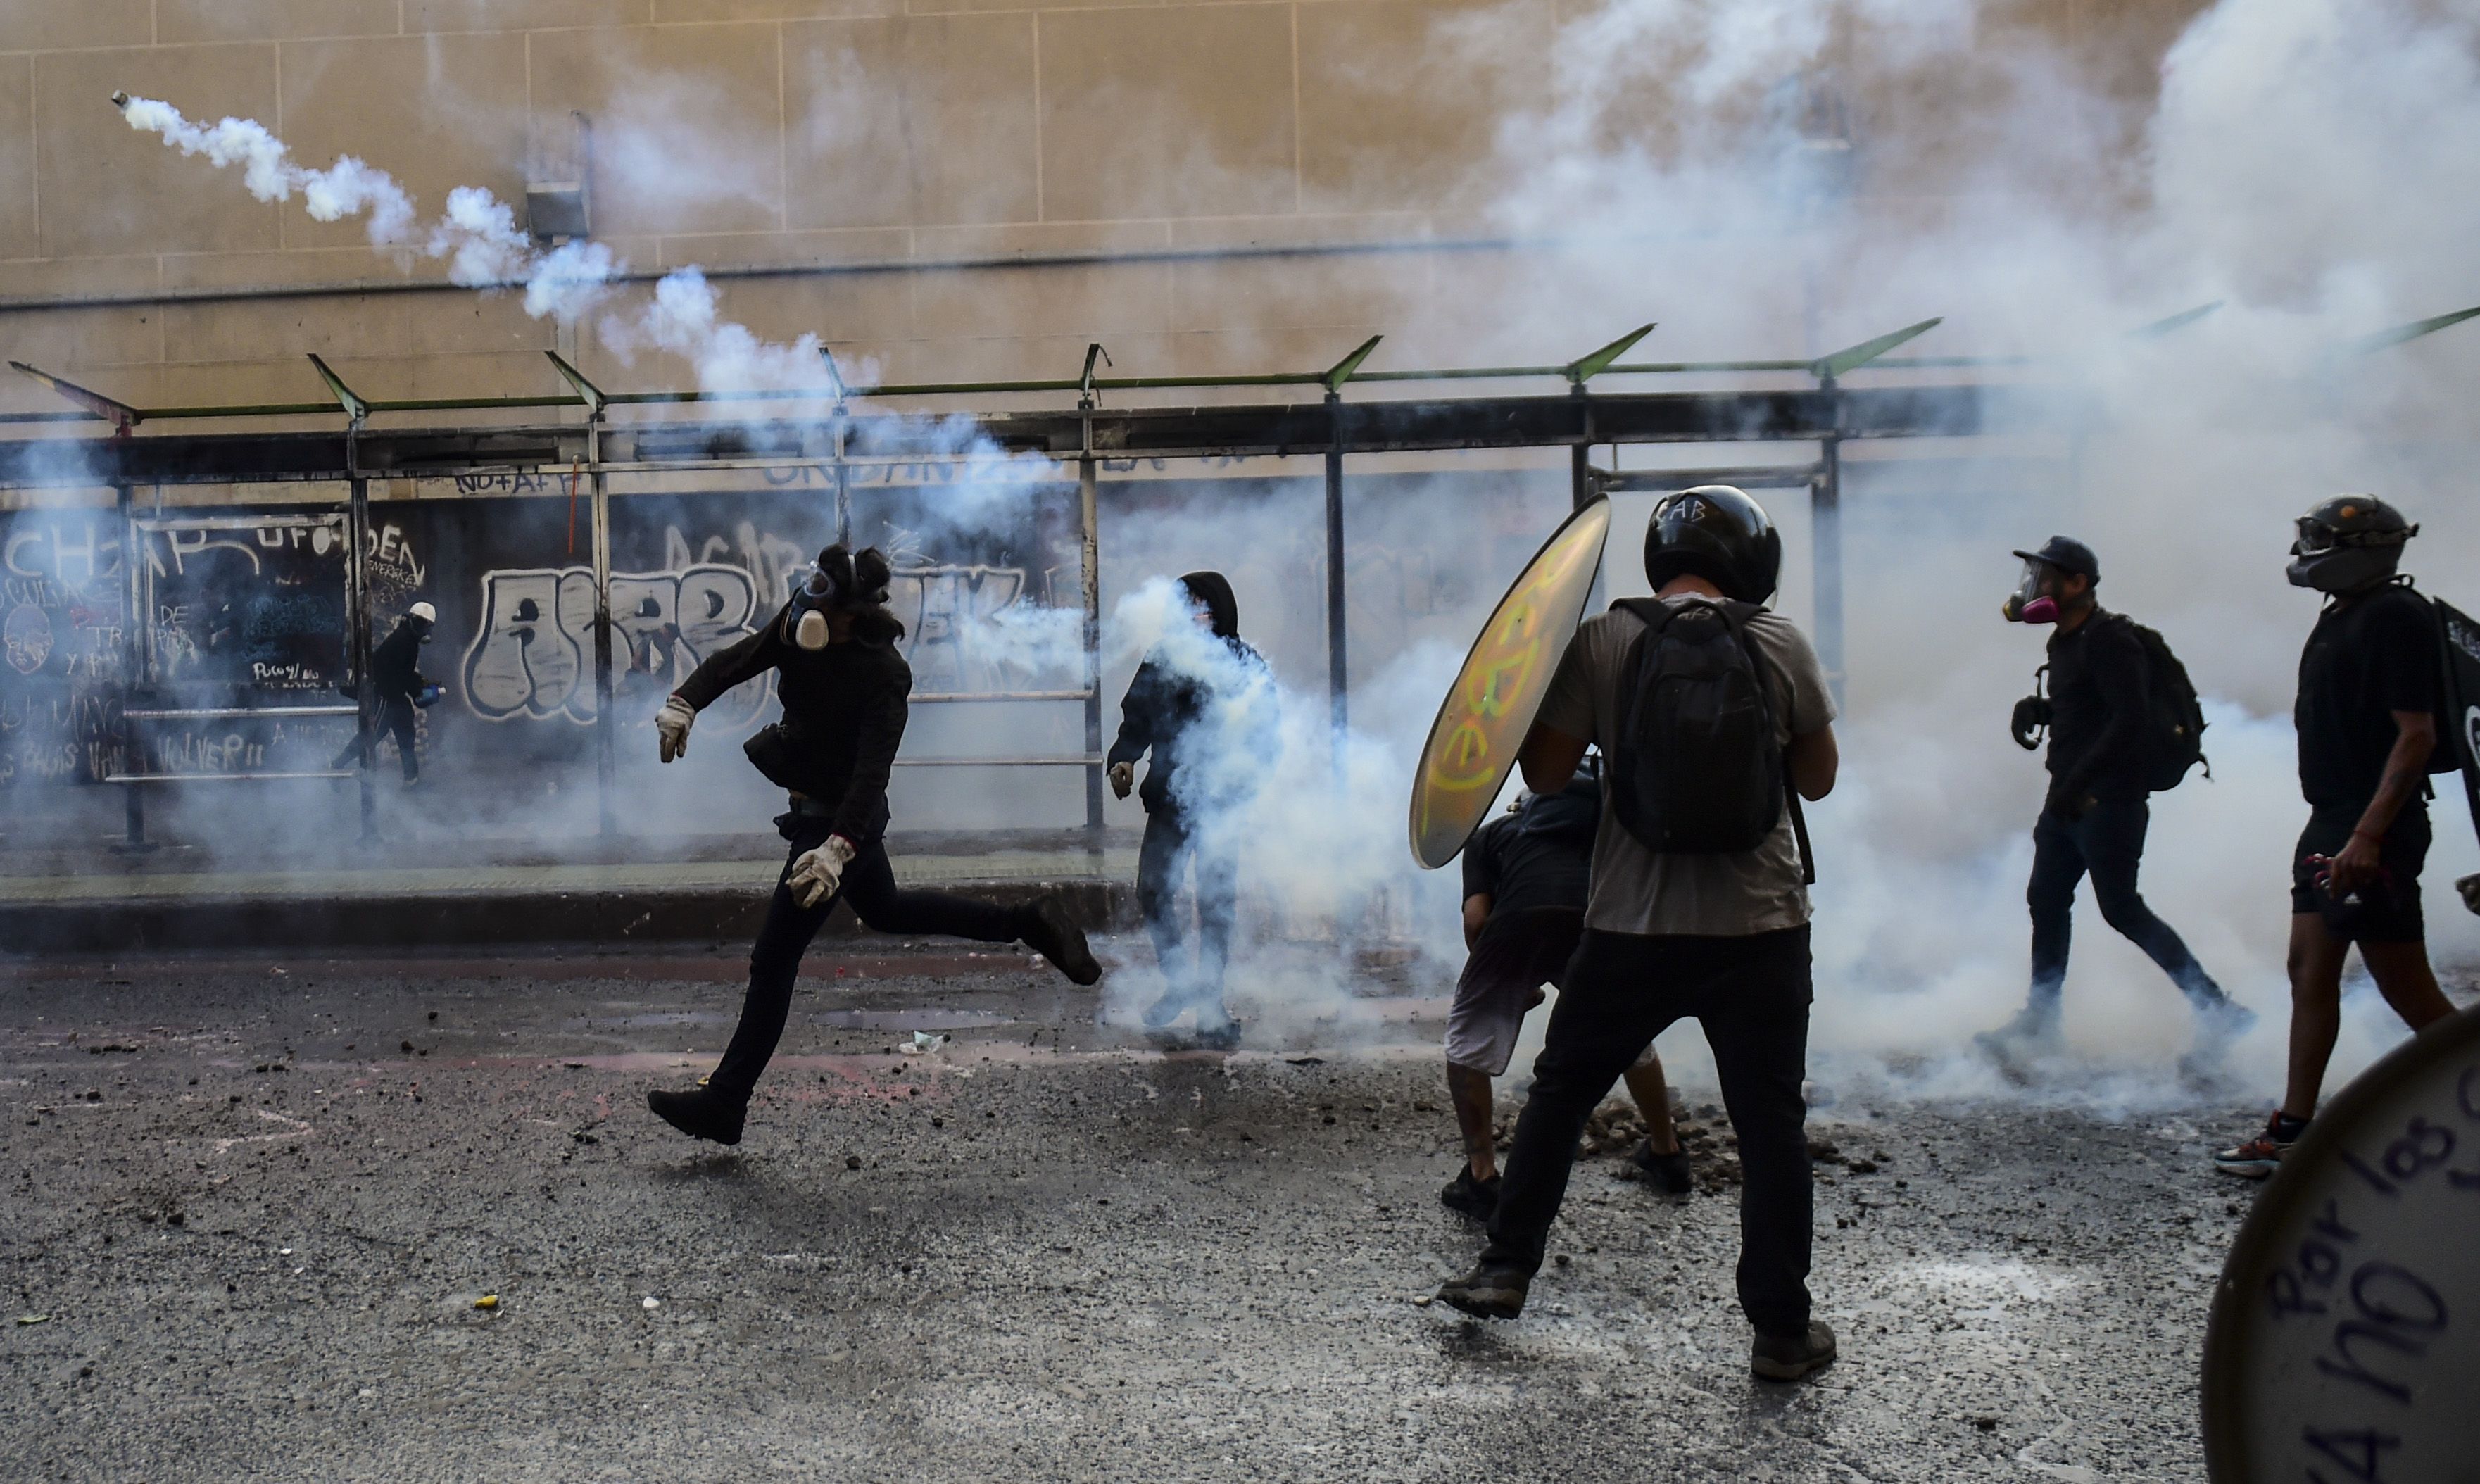 In this image, a protestor throws a tear gas cannister away from other protestors as another holds a shield 